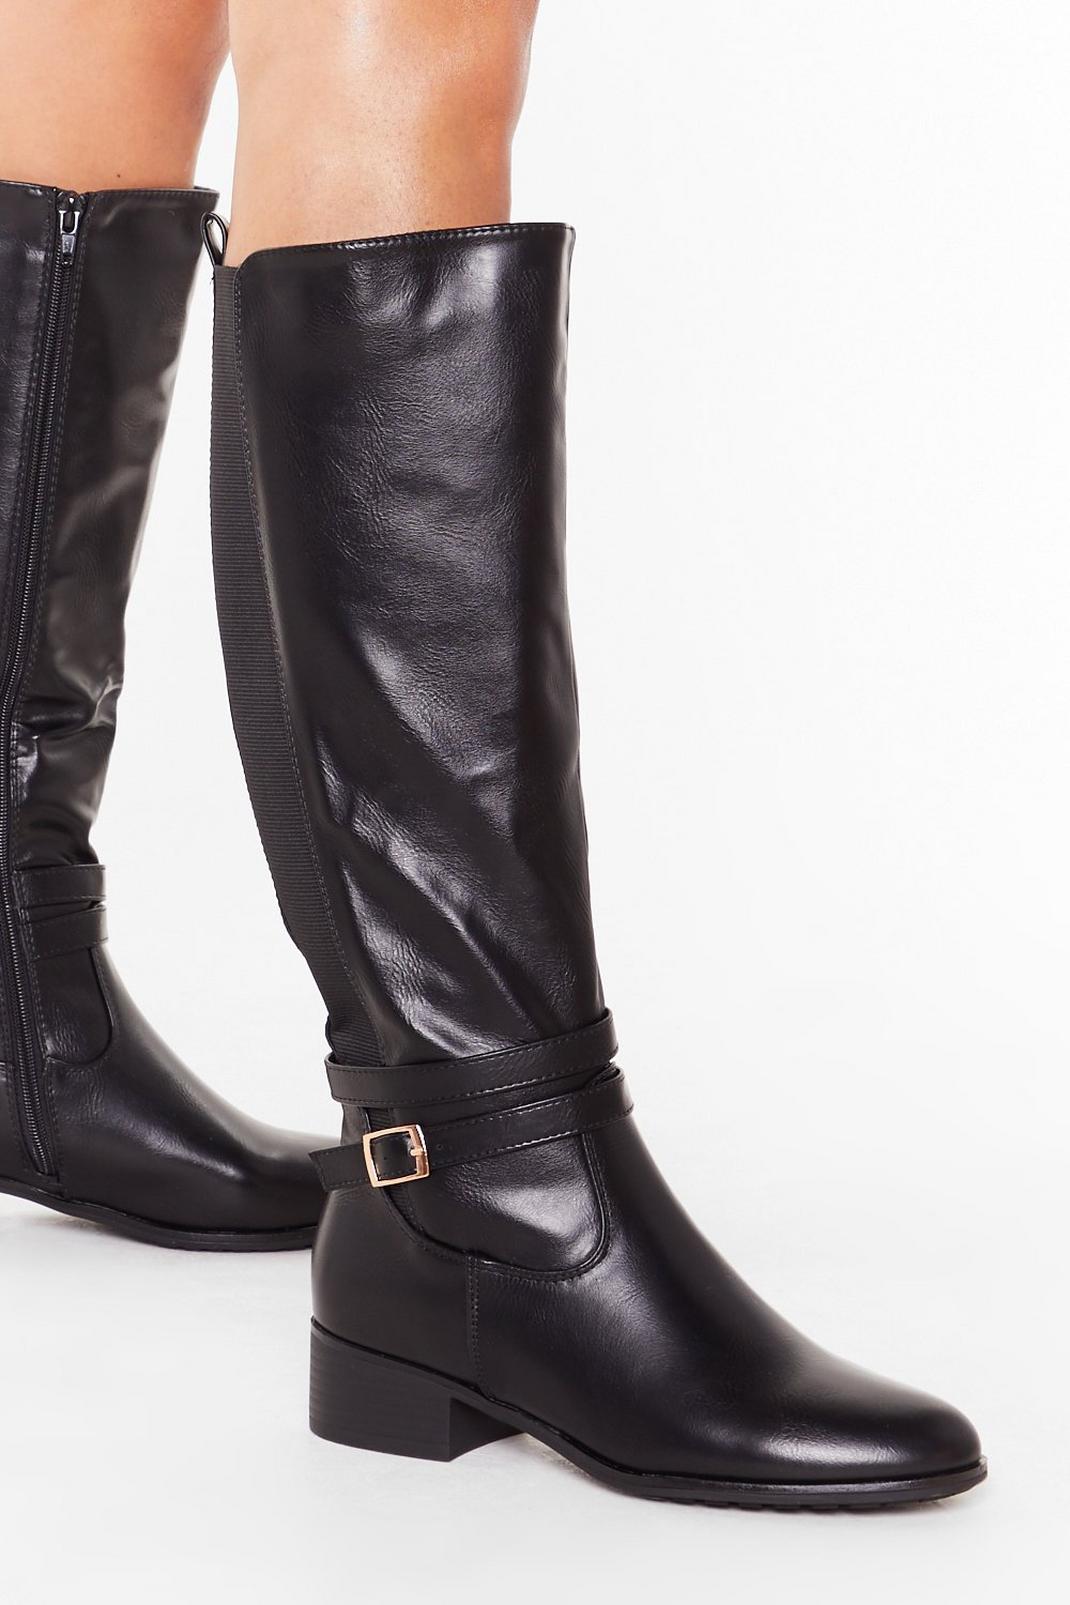 We'll Faux Leather Know Knee High Buckle Boots image number 1